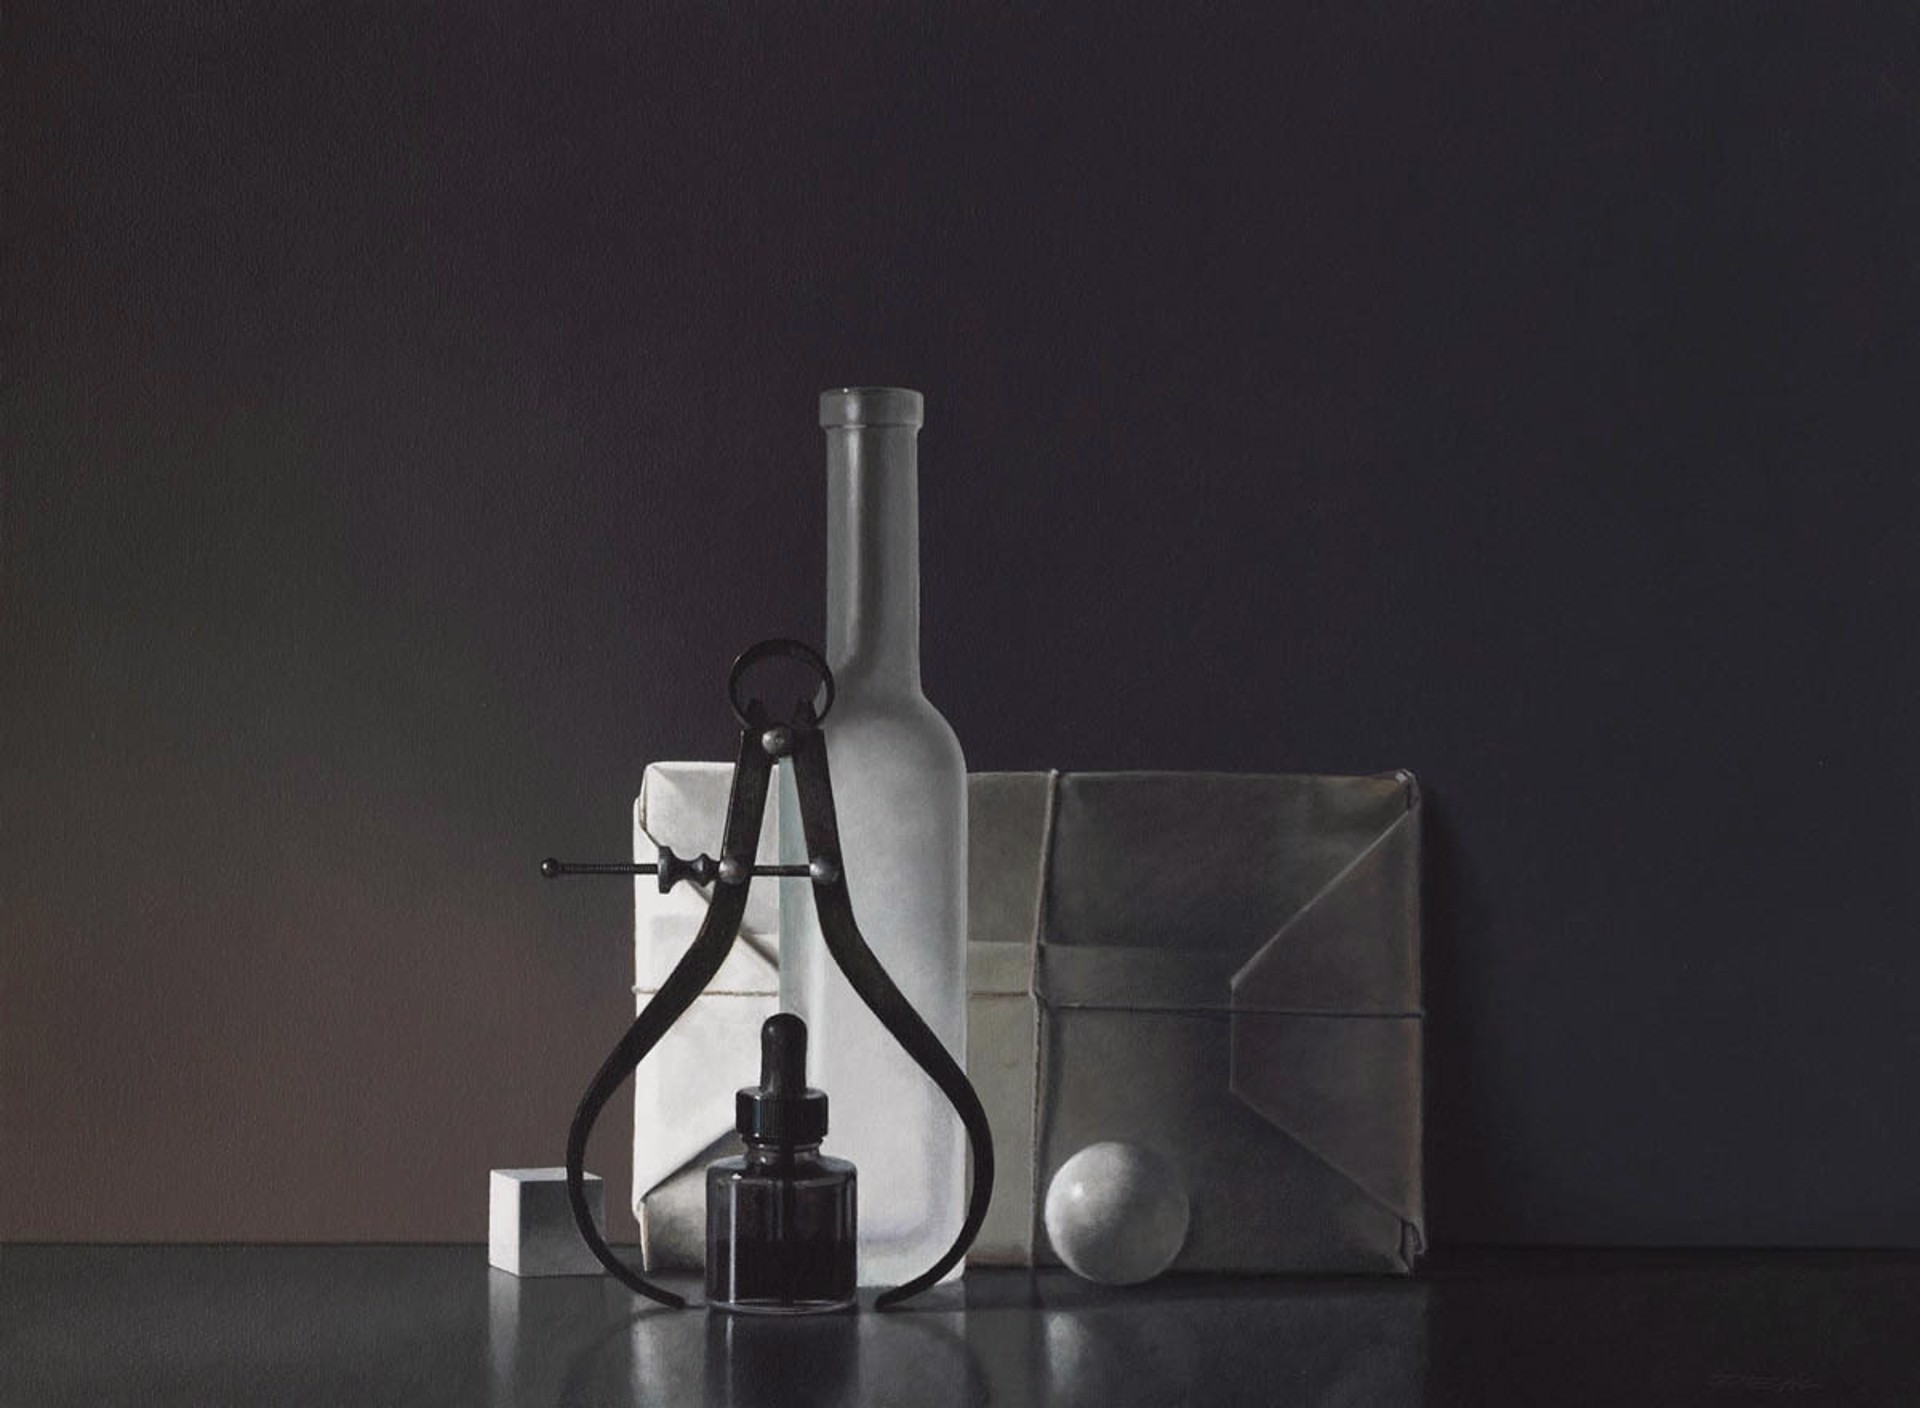 Still Life with Calipers #2 by Guy Diehl